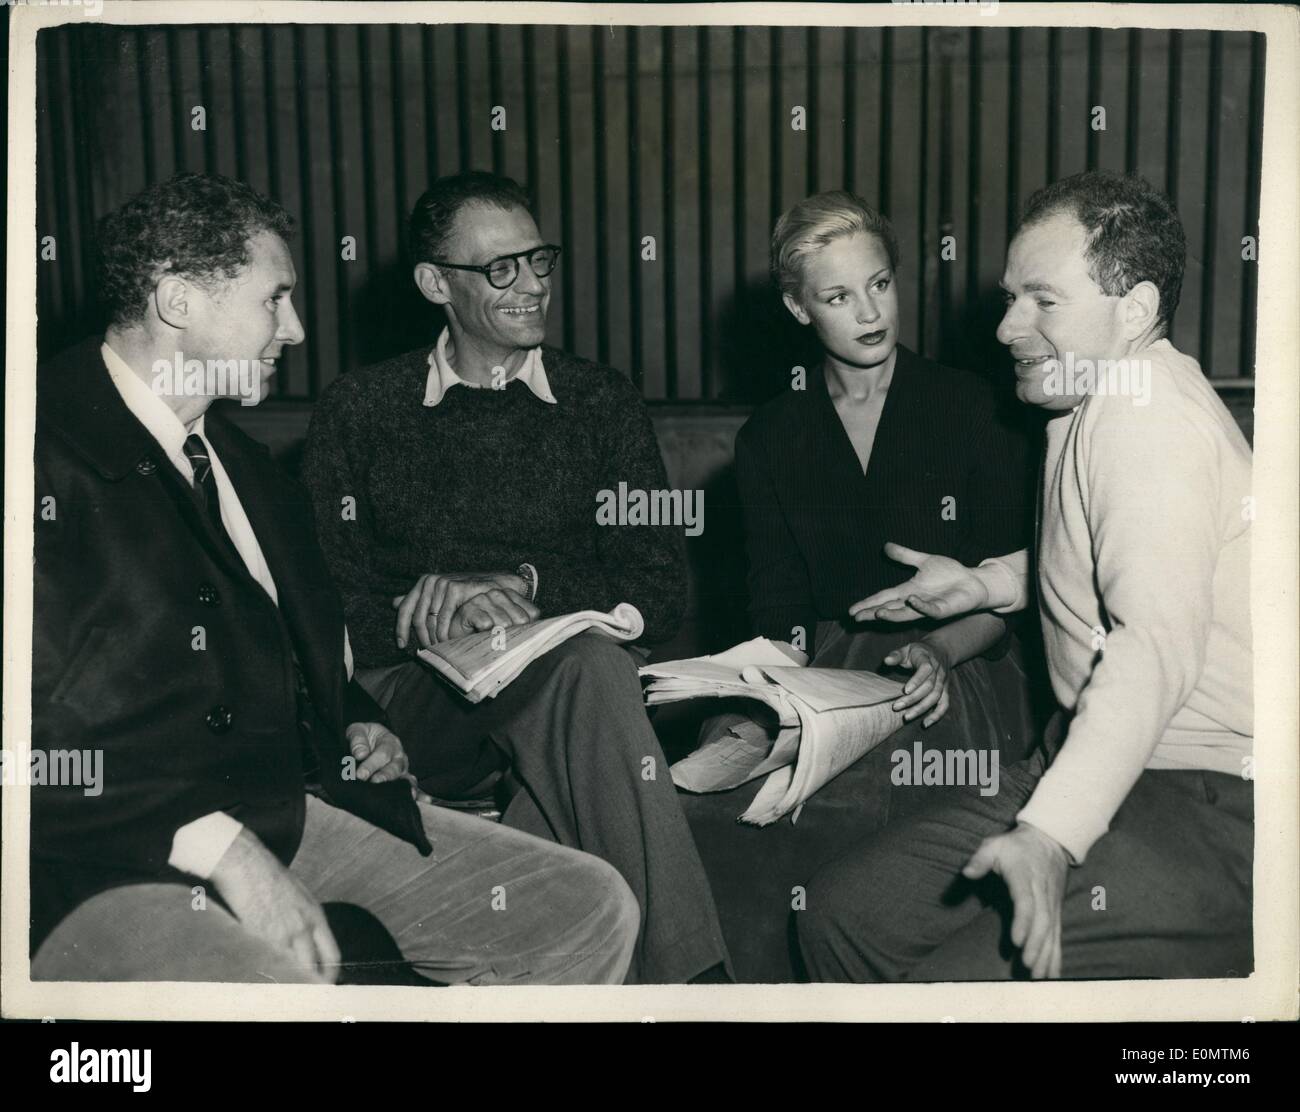 Sep. 09, 1956 - Arthur Miller attends rehearsal of his play a view from the bridge: Arthur Miller, the husband of Marilyn Monroe, today attended rehearsals of his play A view from the Bridge, which the New Watergate Theatre Club will present at the Comedy Theatre, opening on October 11th. Photo shows at today's rehearsal ( L to R); Anthony Quayle; Arthur Miller, Mary Ure and Peter Brook, the producer discussing the scripts. Stock Photo